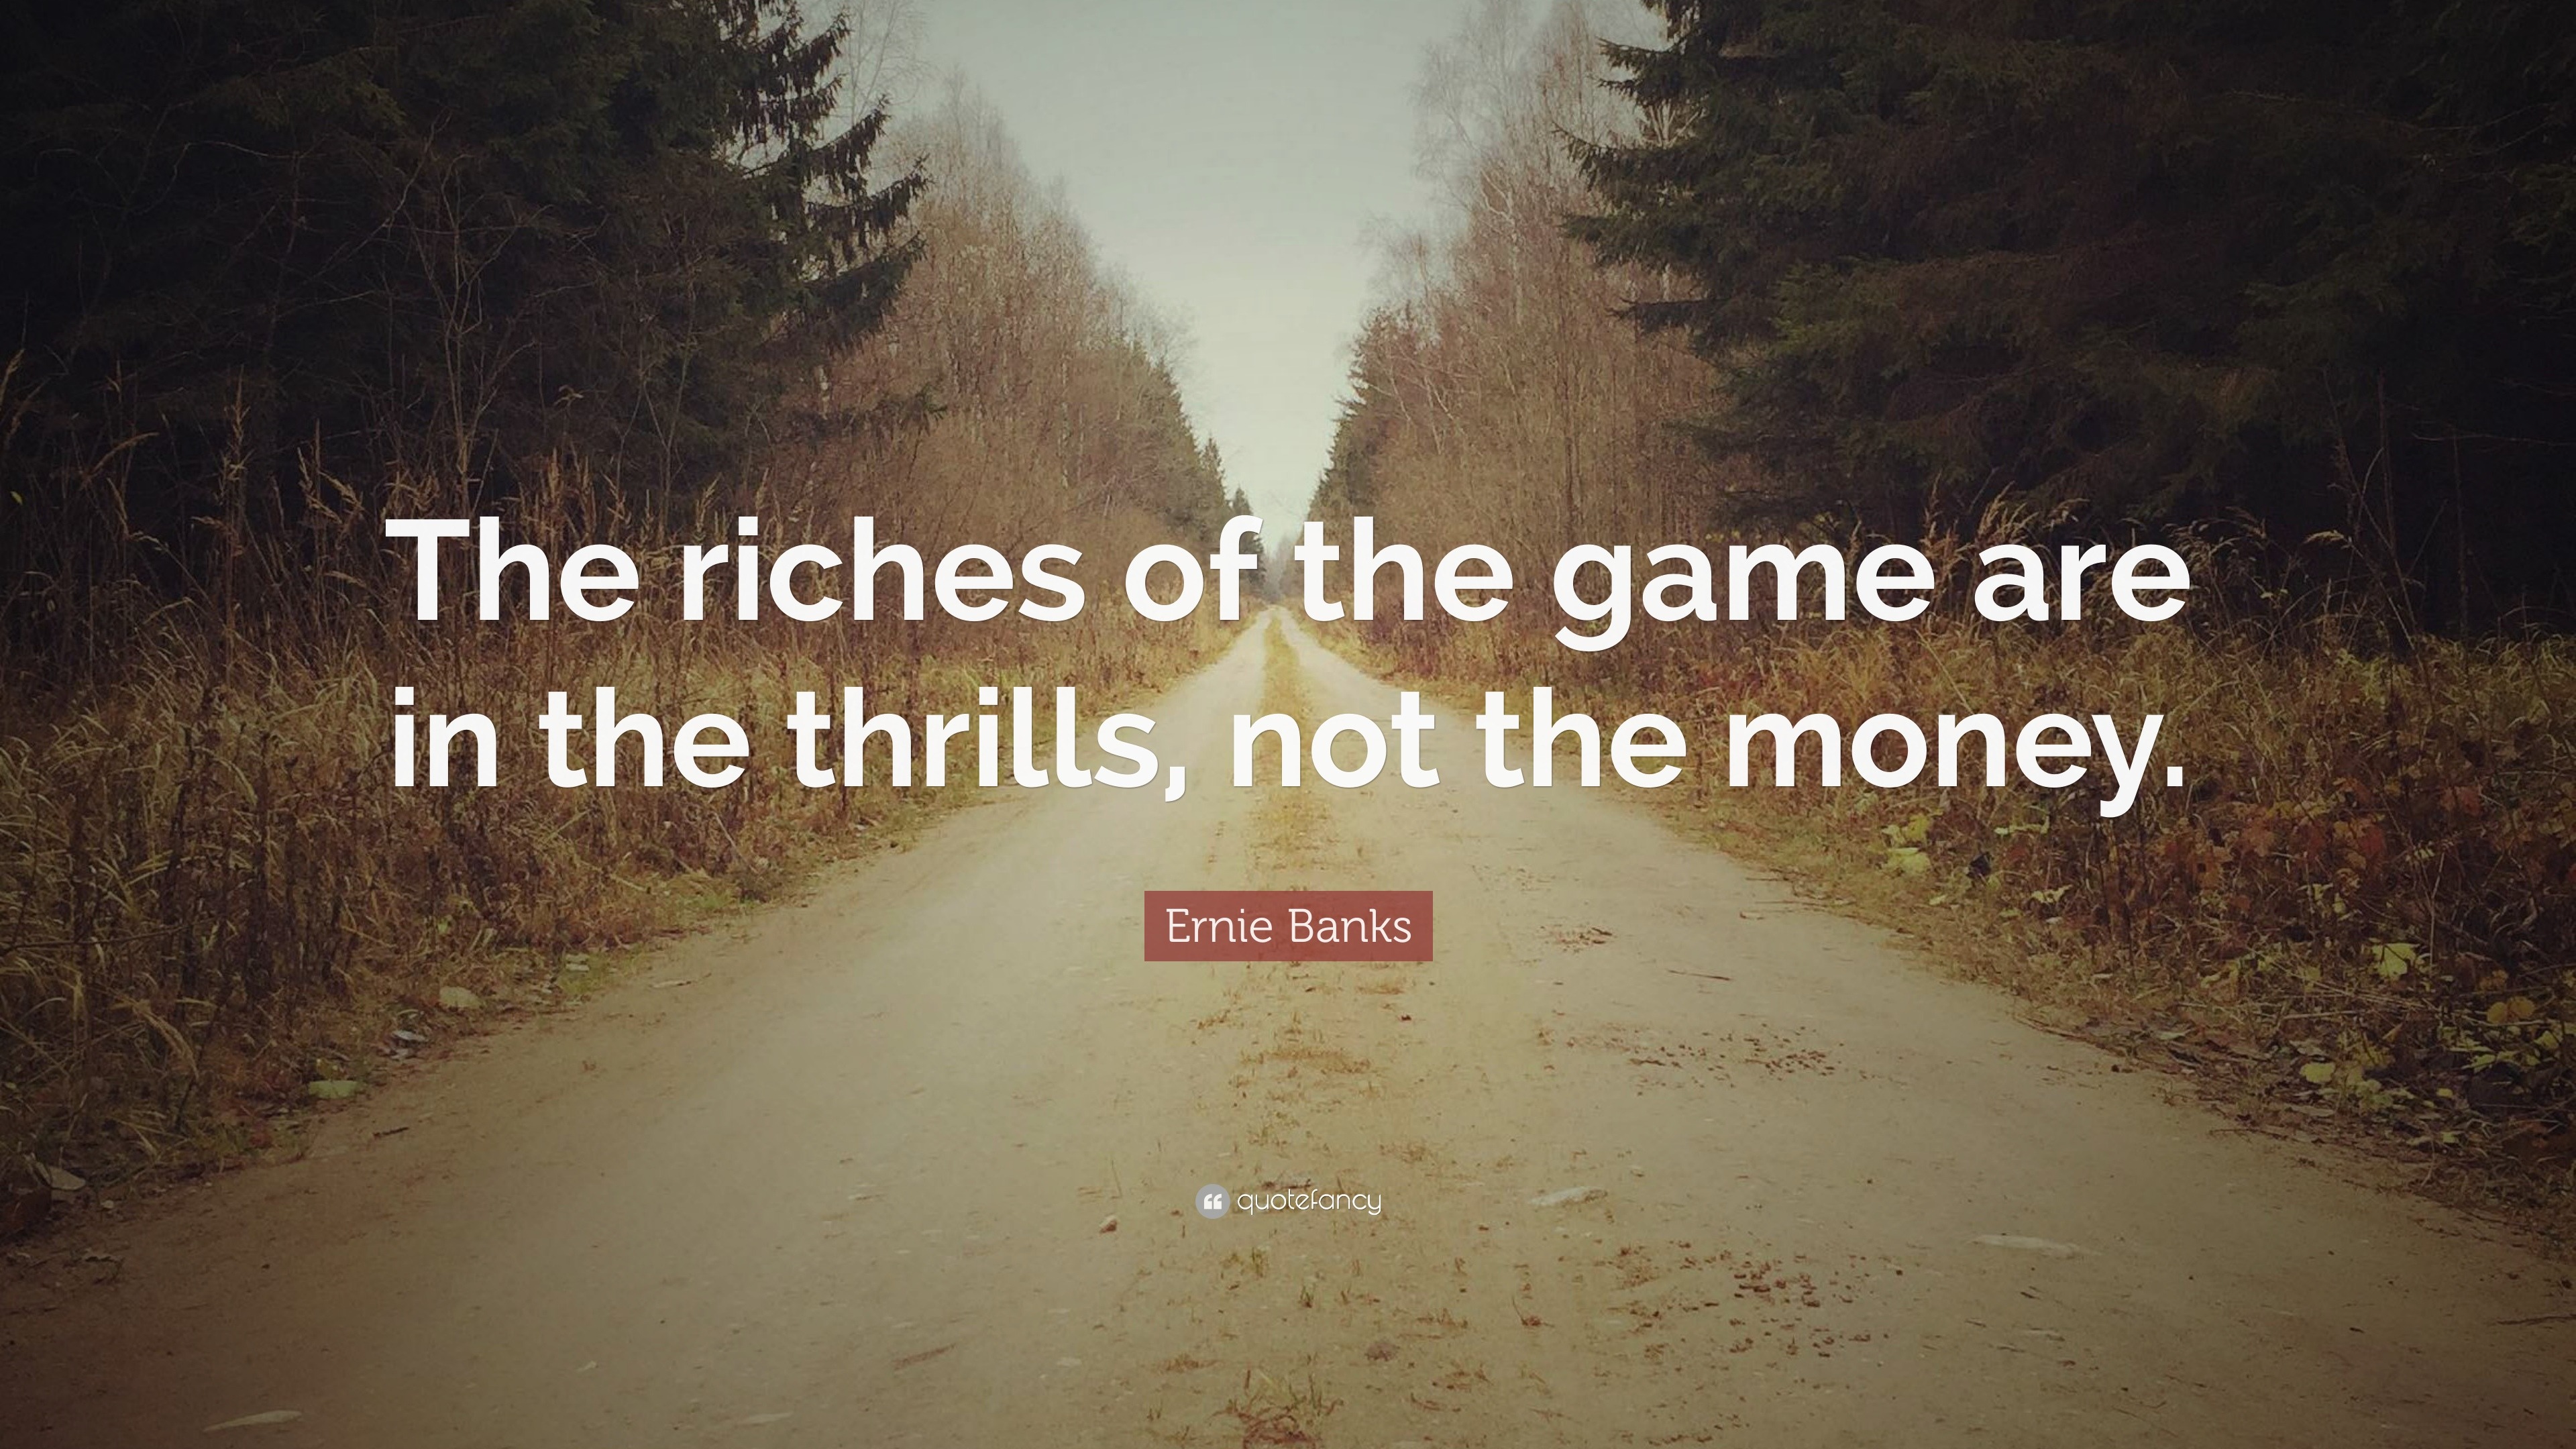 Ernie Banks: Riches of Game - Money Quotes DailyMoney Quotes Daily